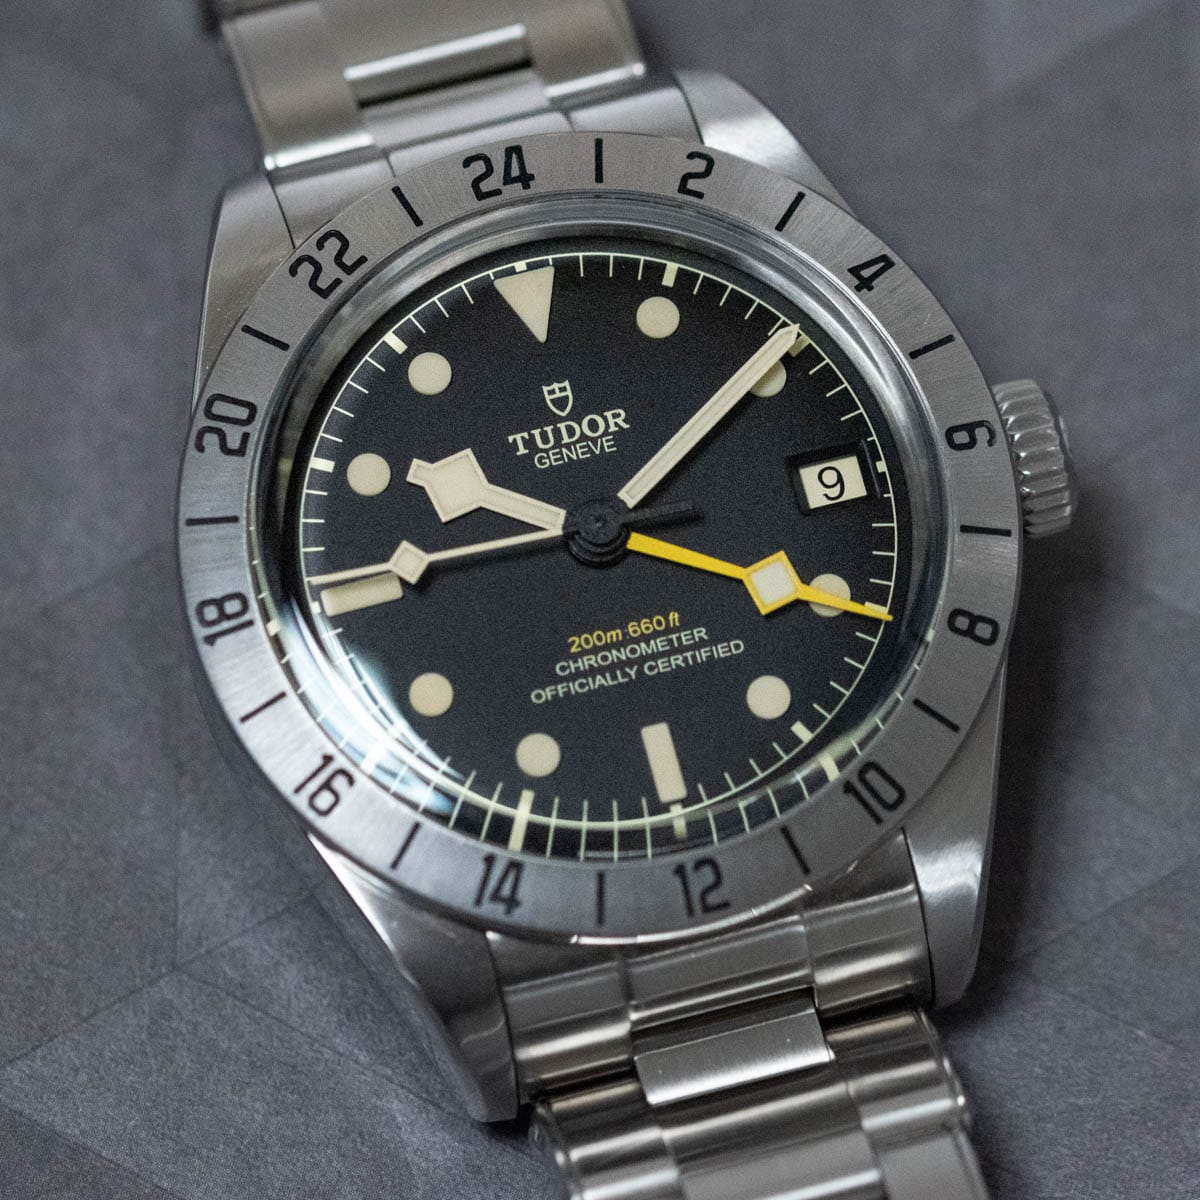 Stylied photo of  of Black Bay Pro GMT